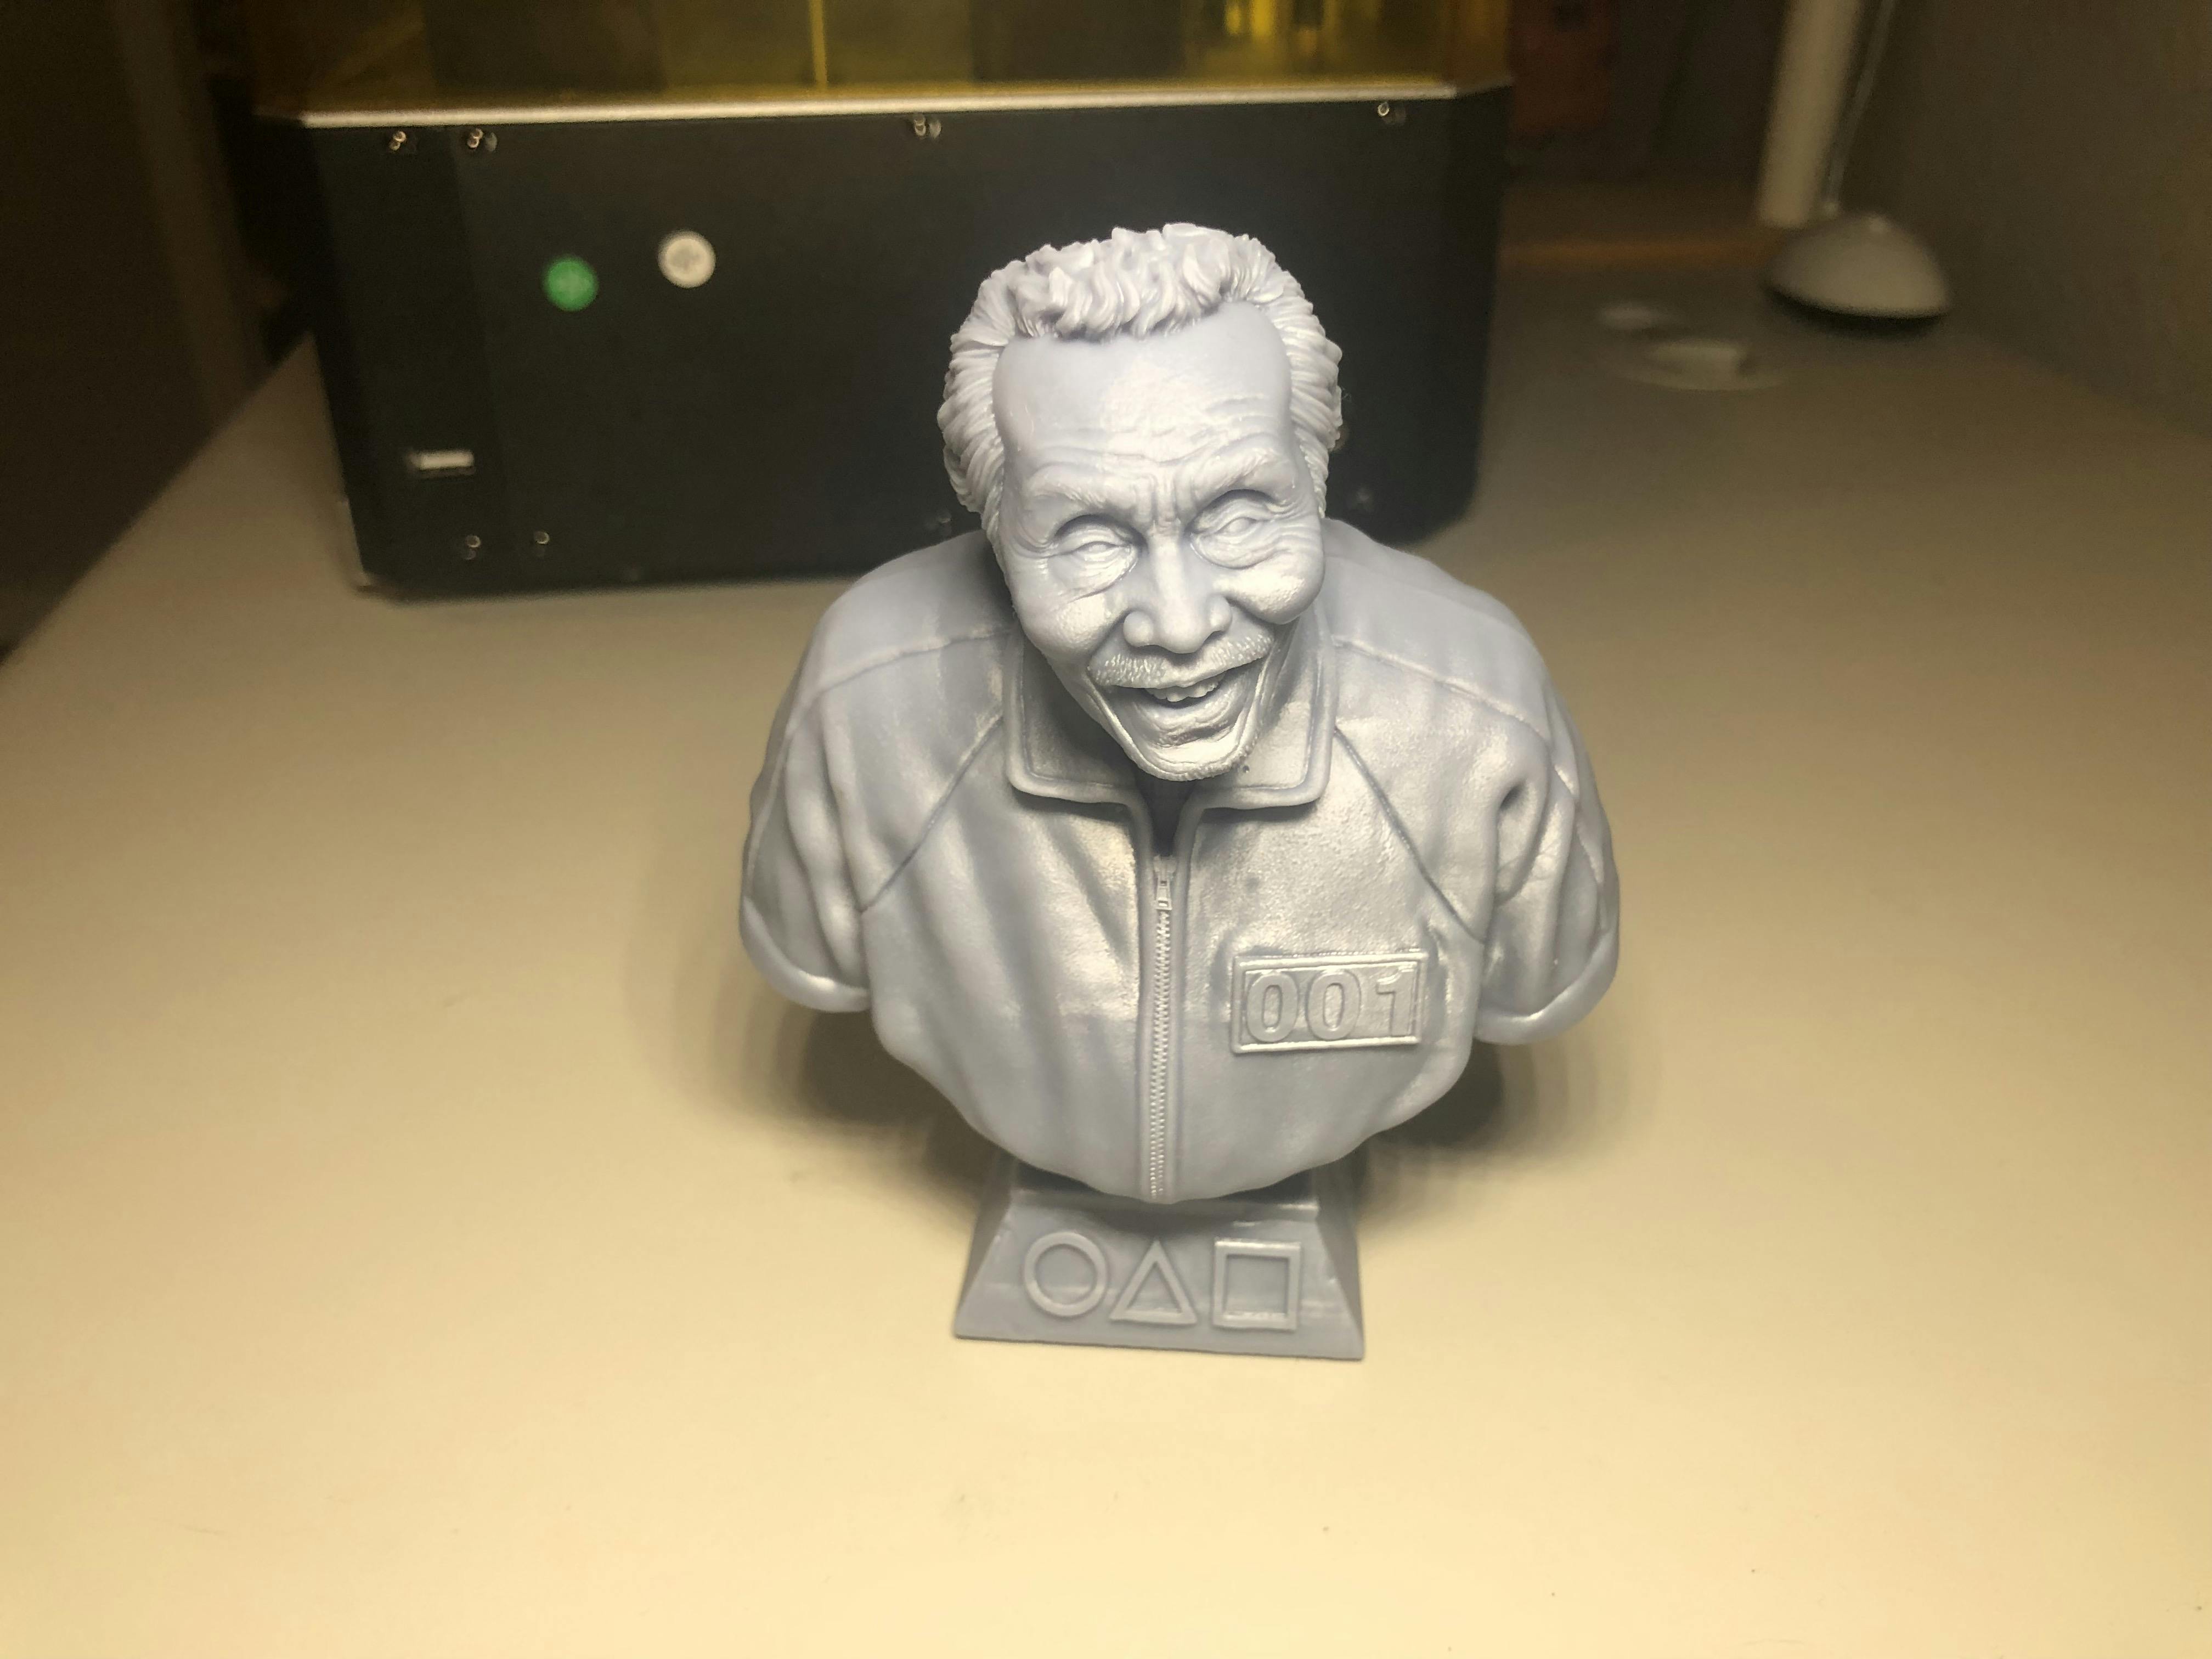 Anycubic Photon Mono X 6K Review 